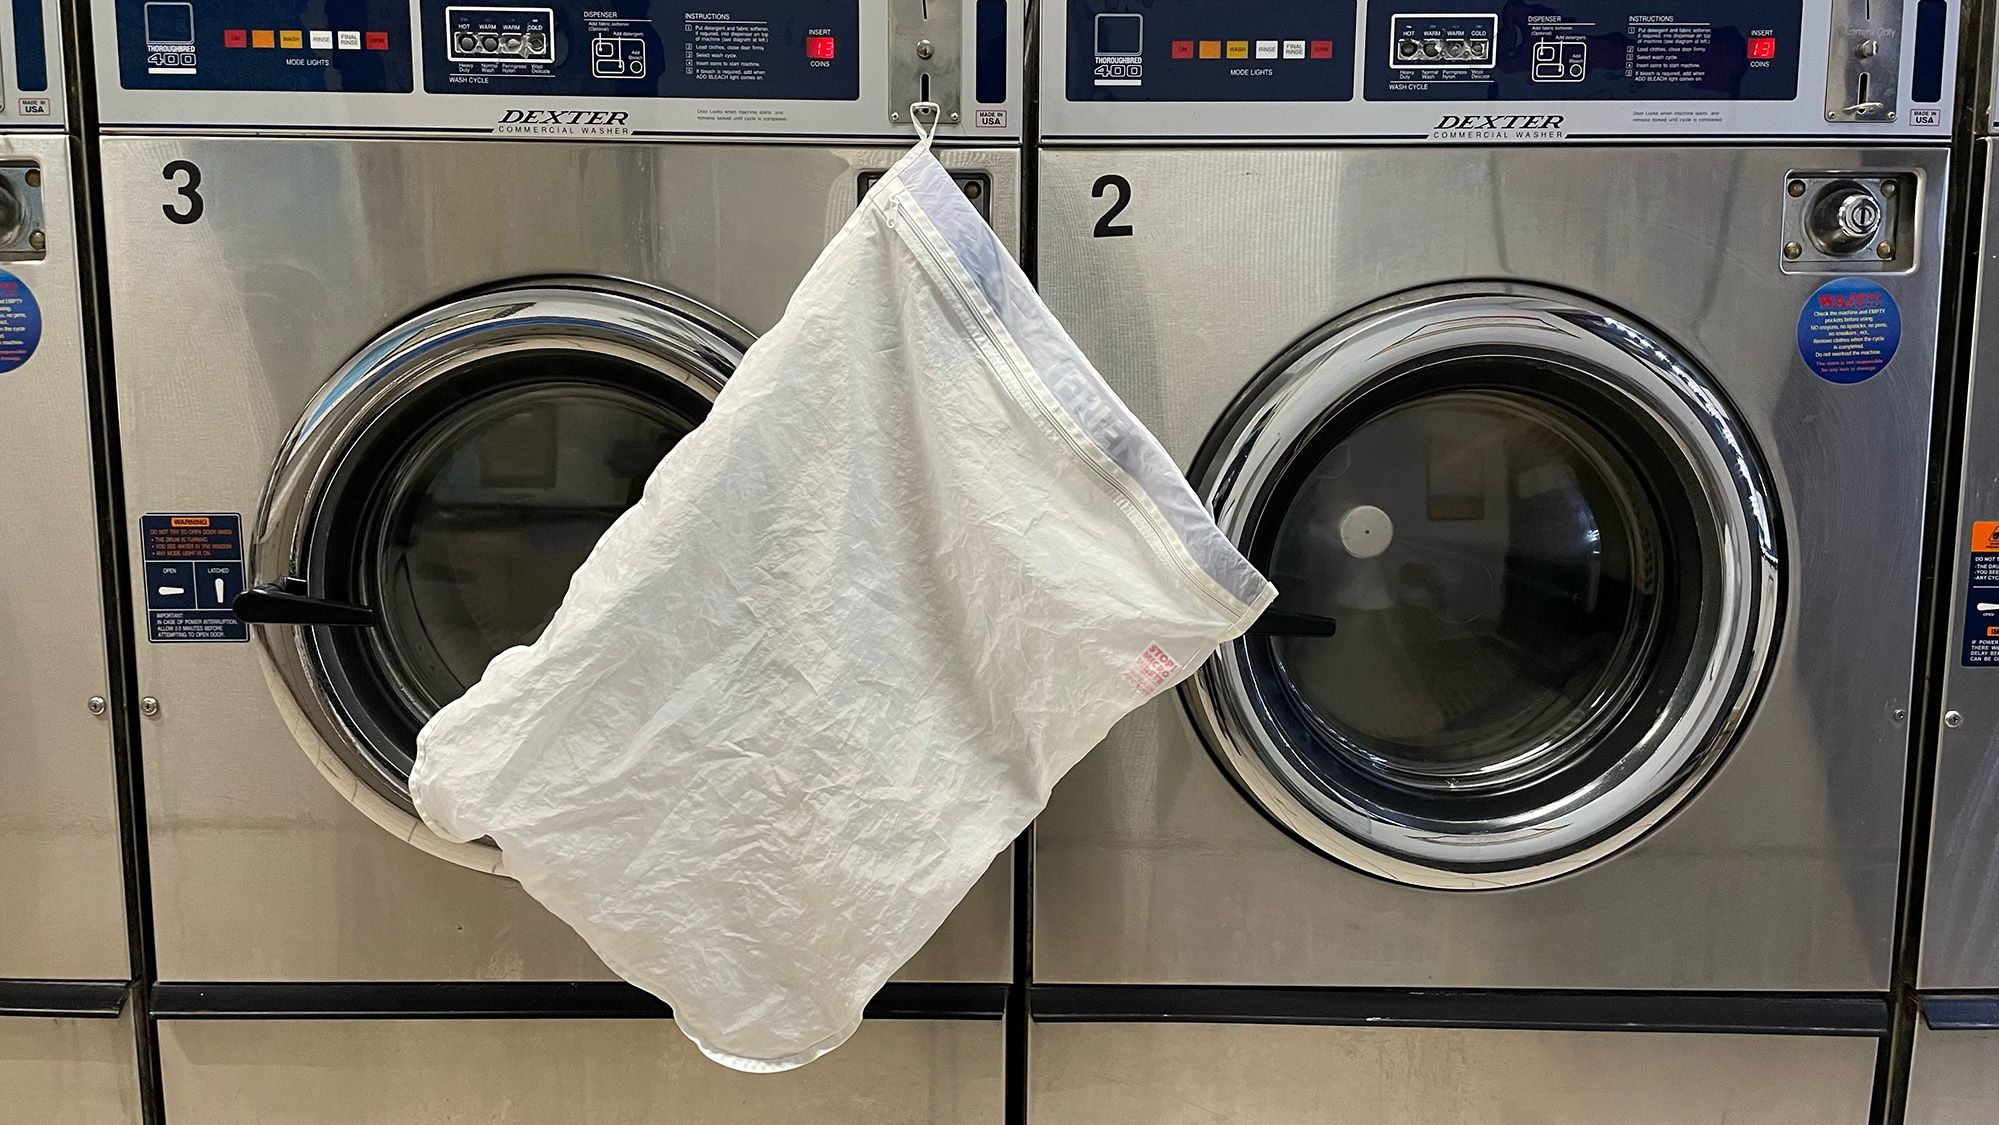 Guppyfriend washing bag review: The laundry bag that filters